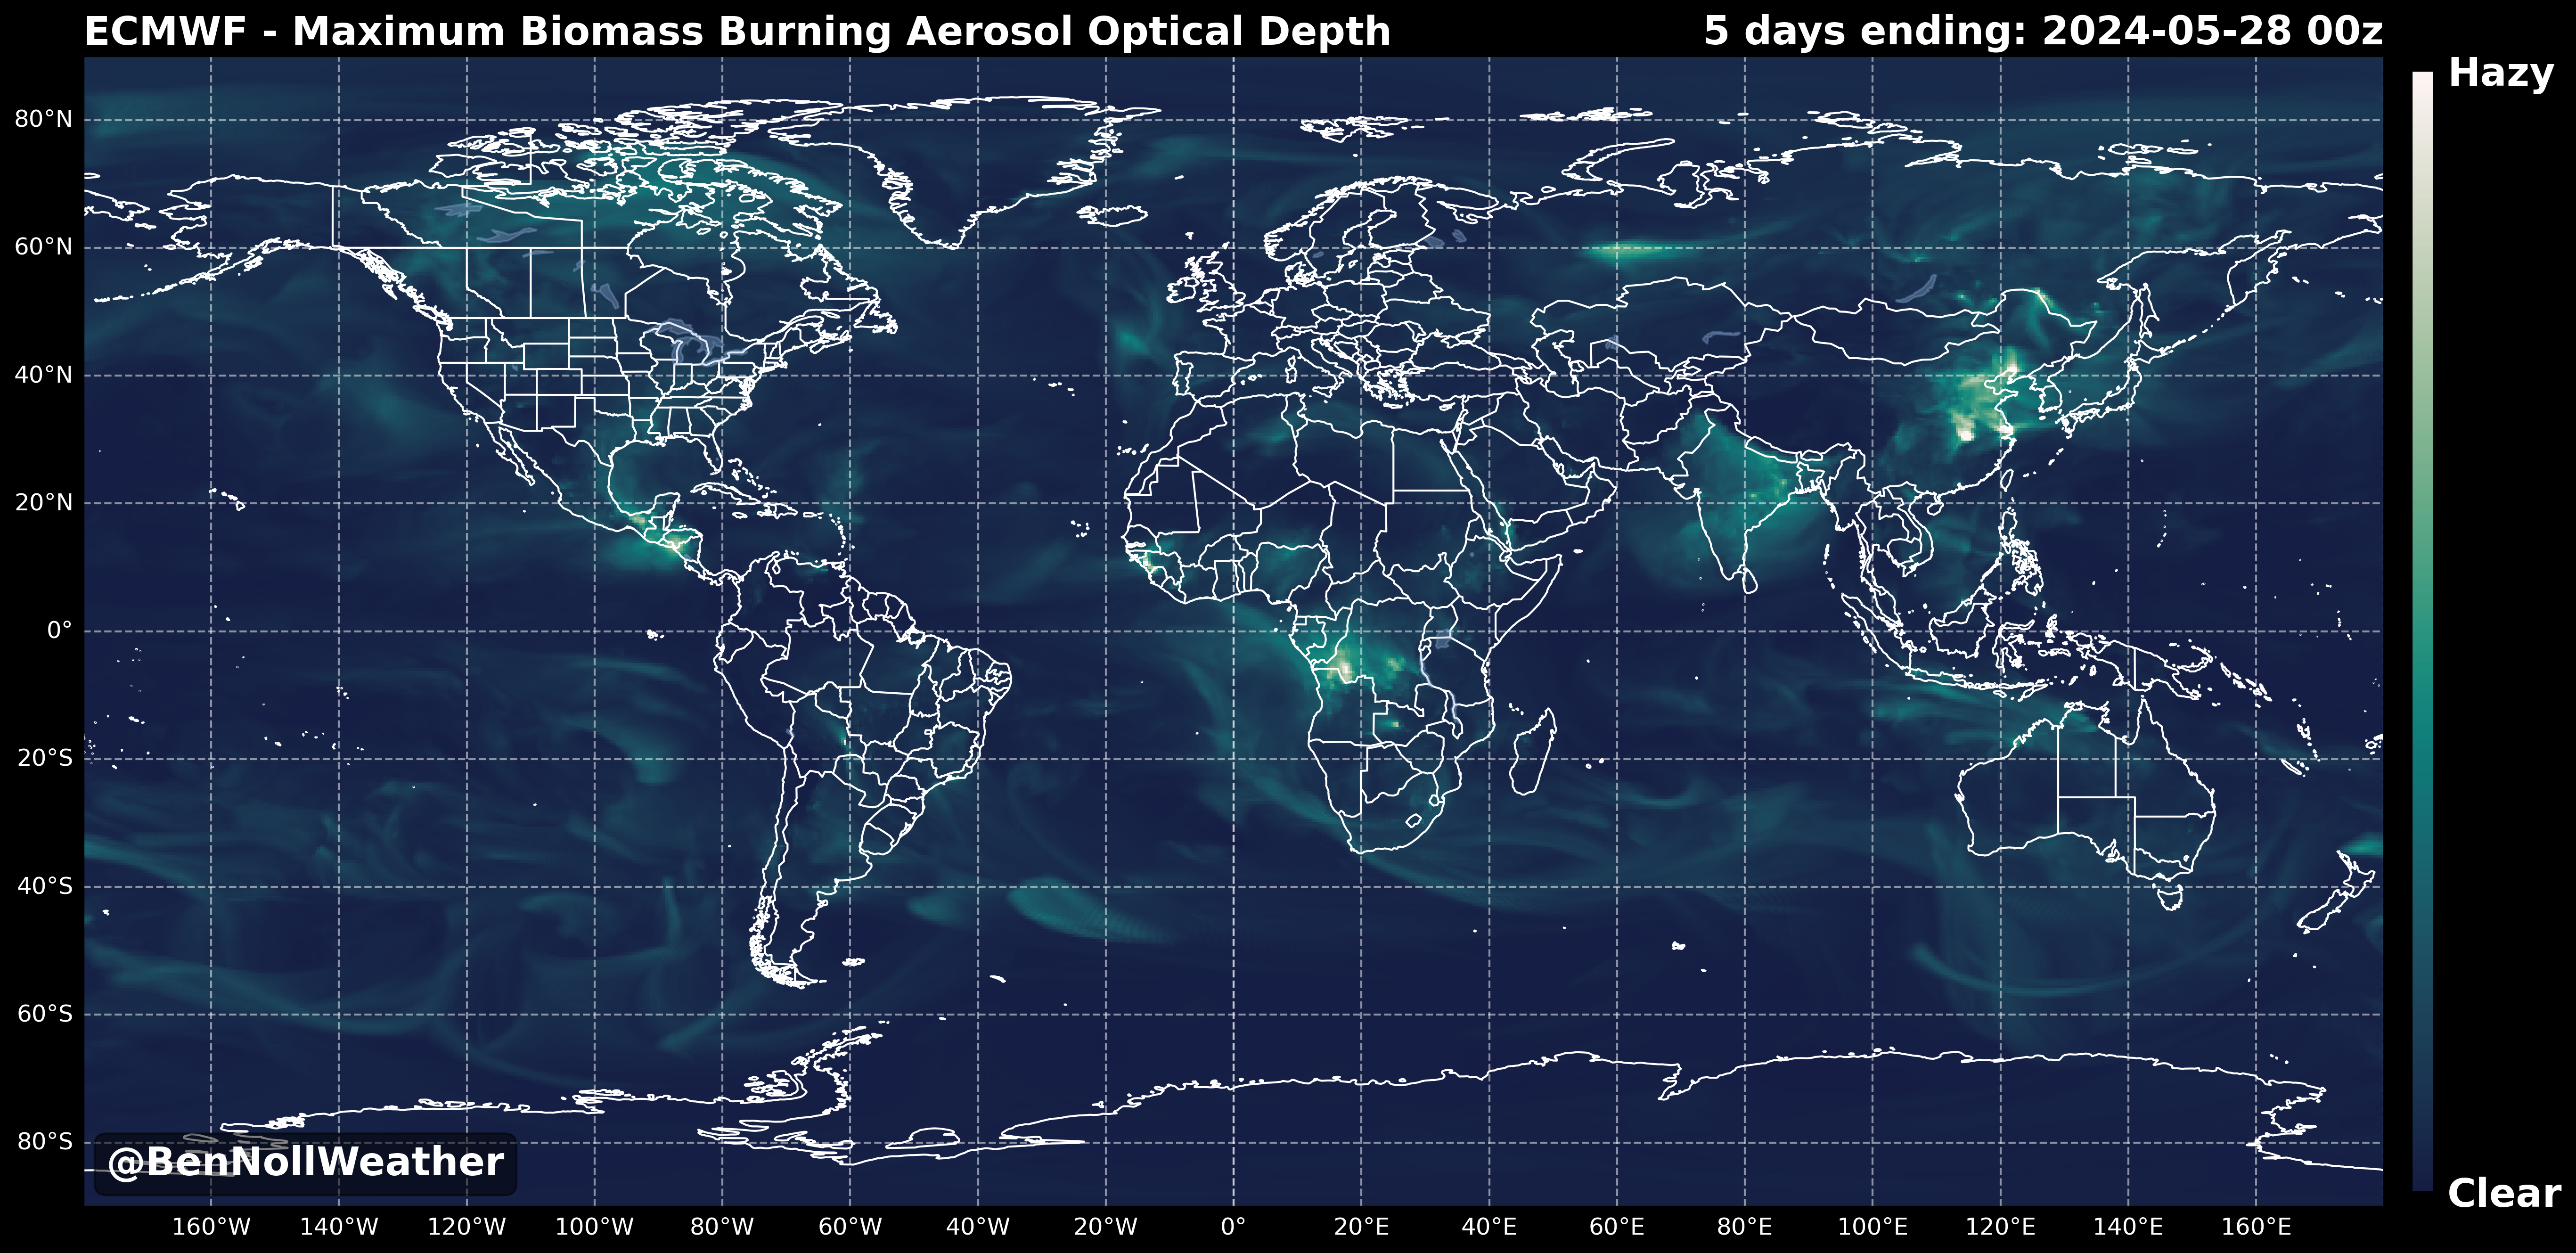 Global Smoke and Dust Plumes